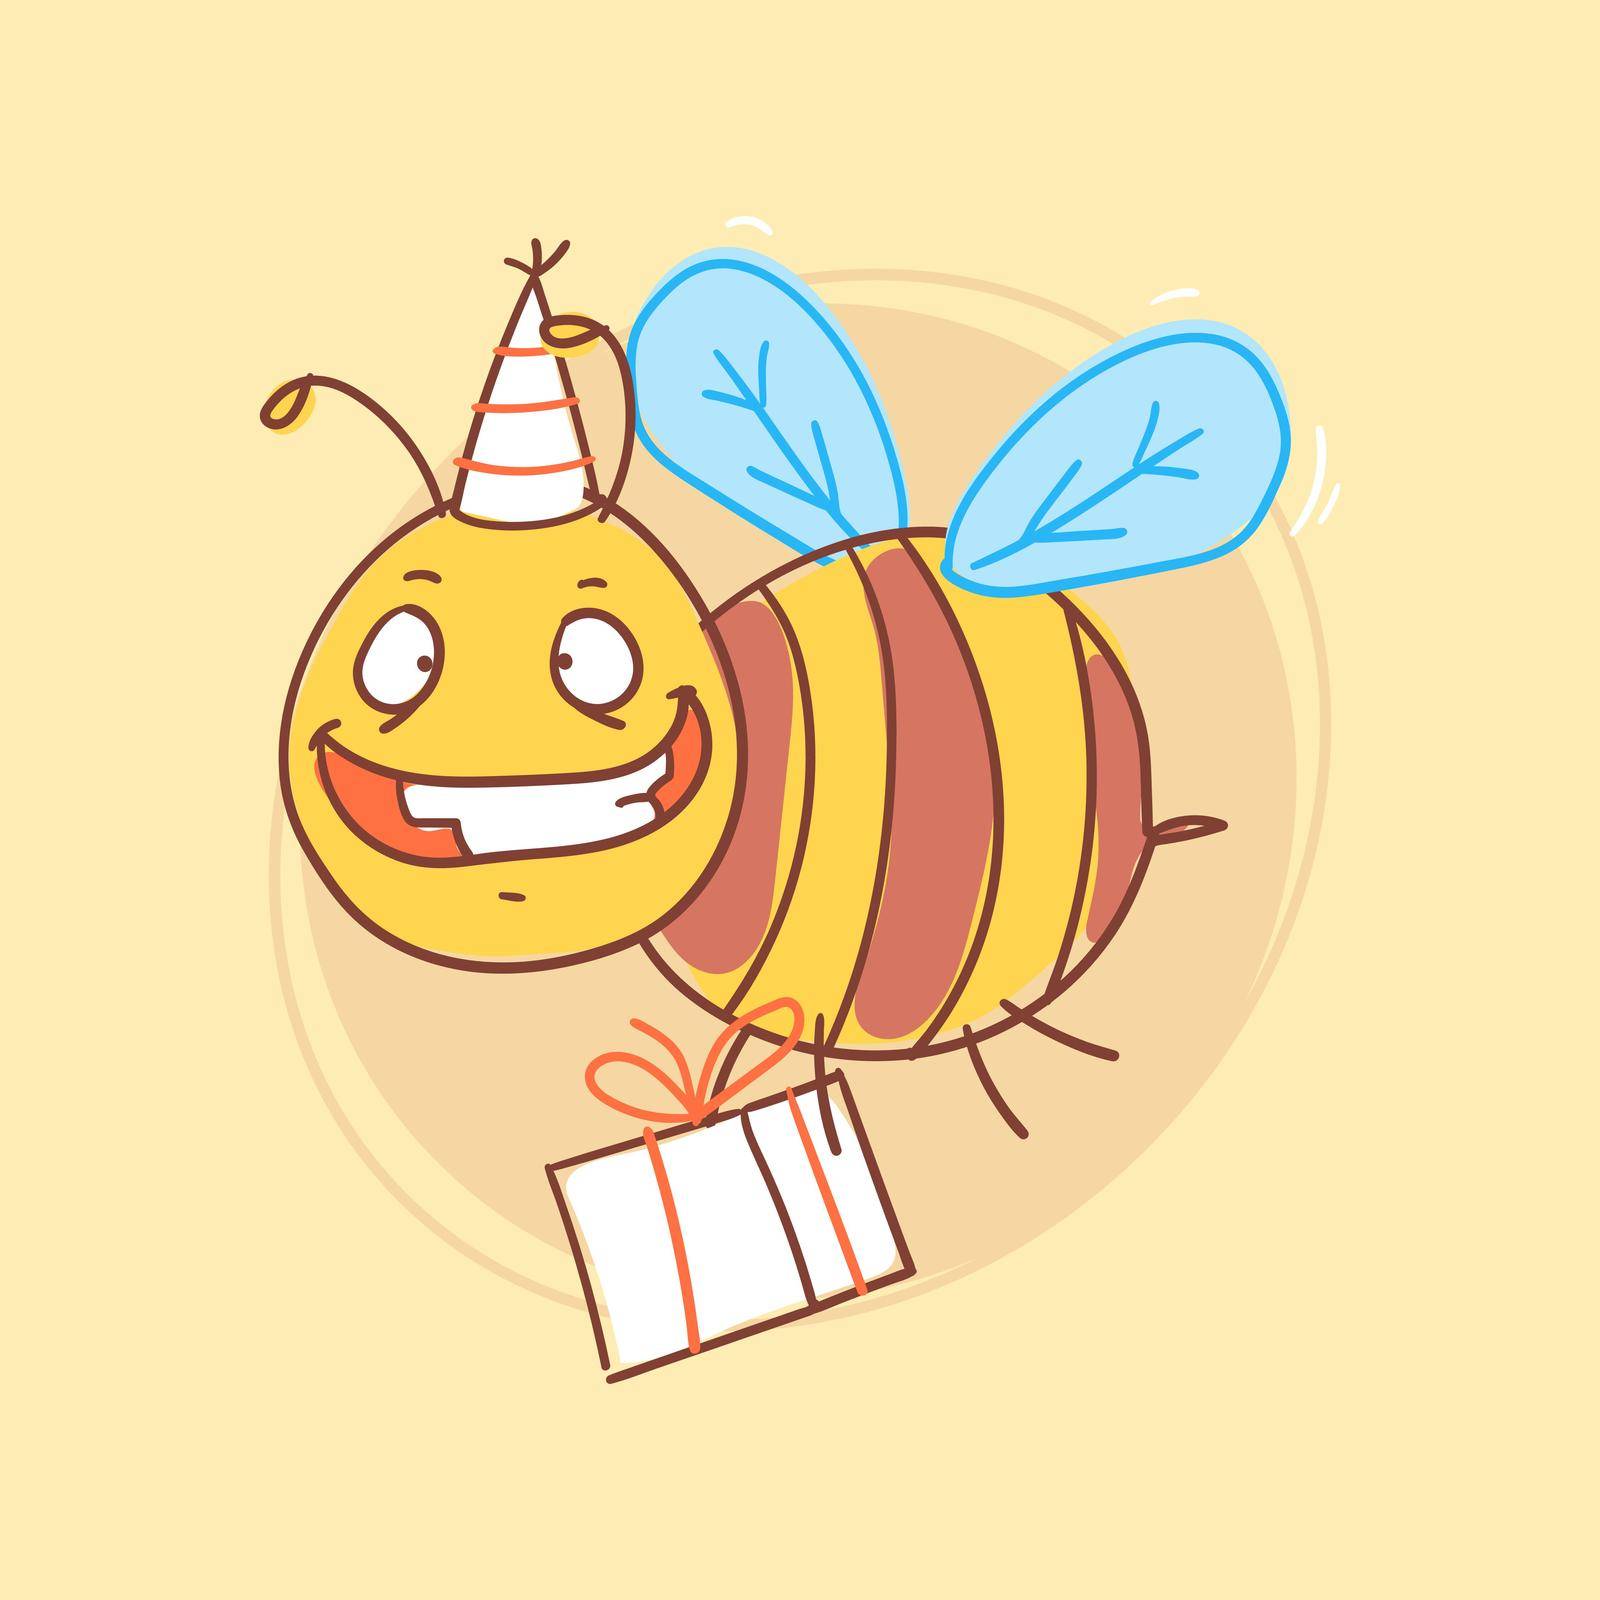 Bee cheerful holds gift and smiles. Funny character by yuriytsirkunov